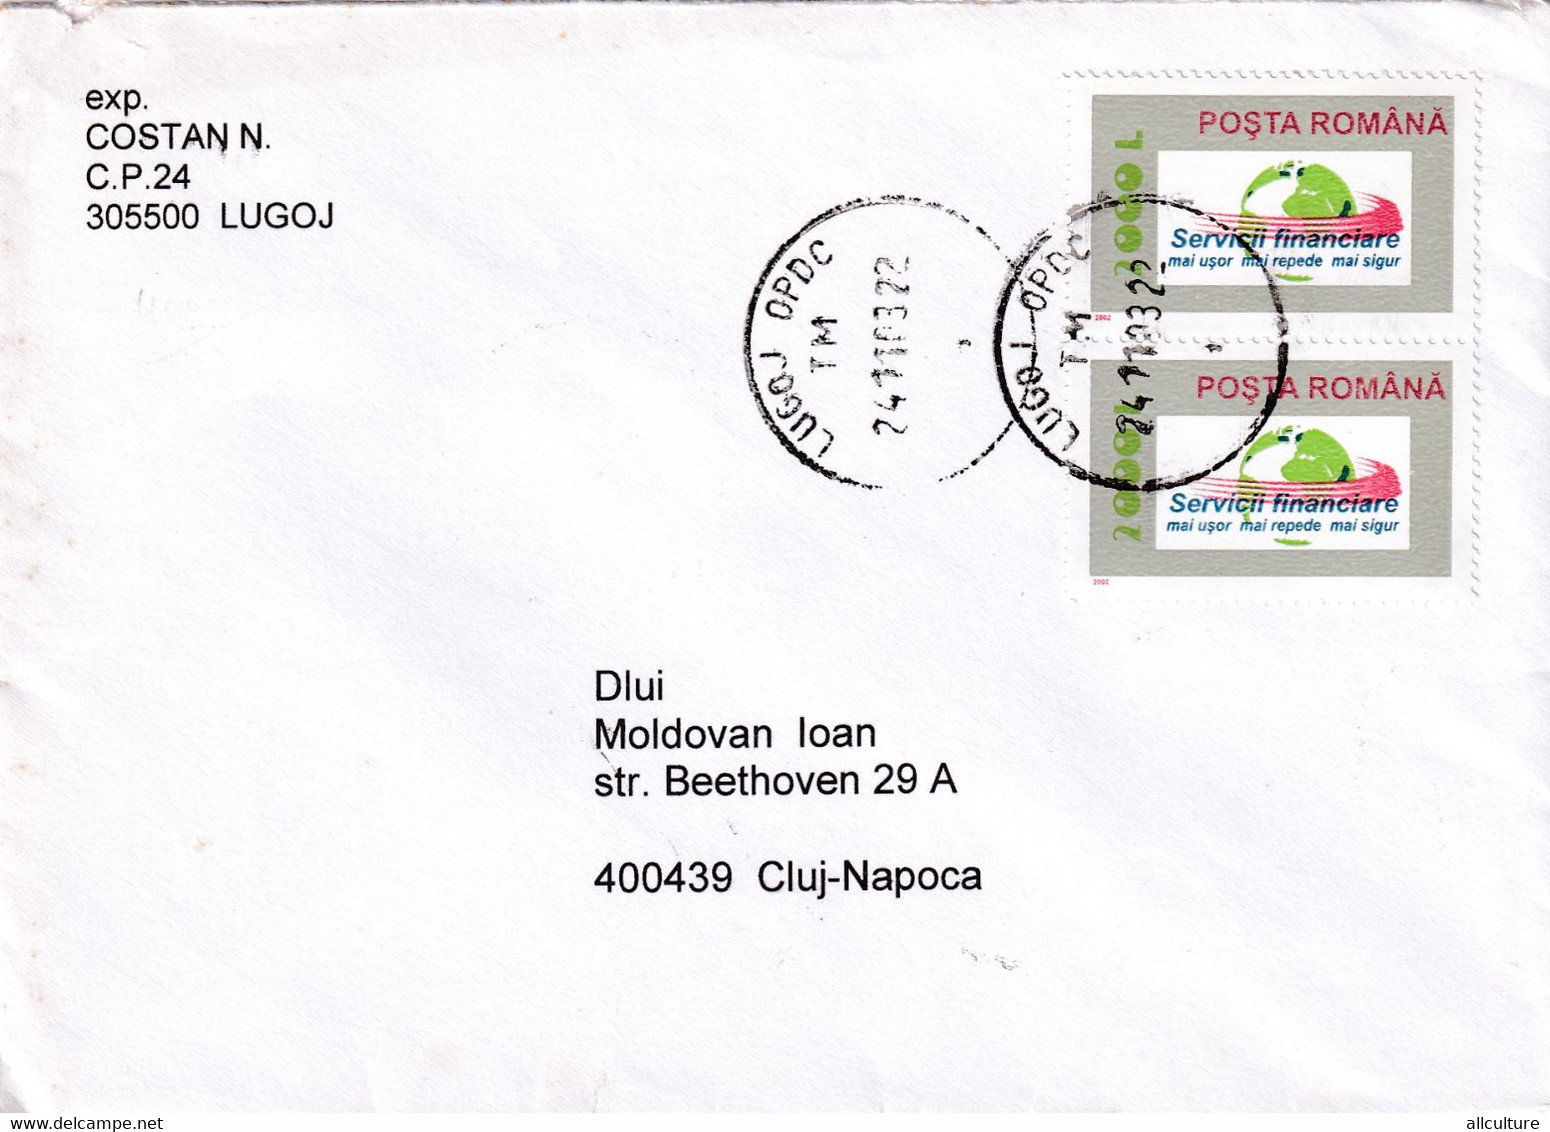 A9424-  LETTER FROM LUGOJ 2003 ROMANIA USED STAMP ON COVER ROMANIAN POSTAGE SENT TO CLUJ NAPOCA - Lettres & Documents